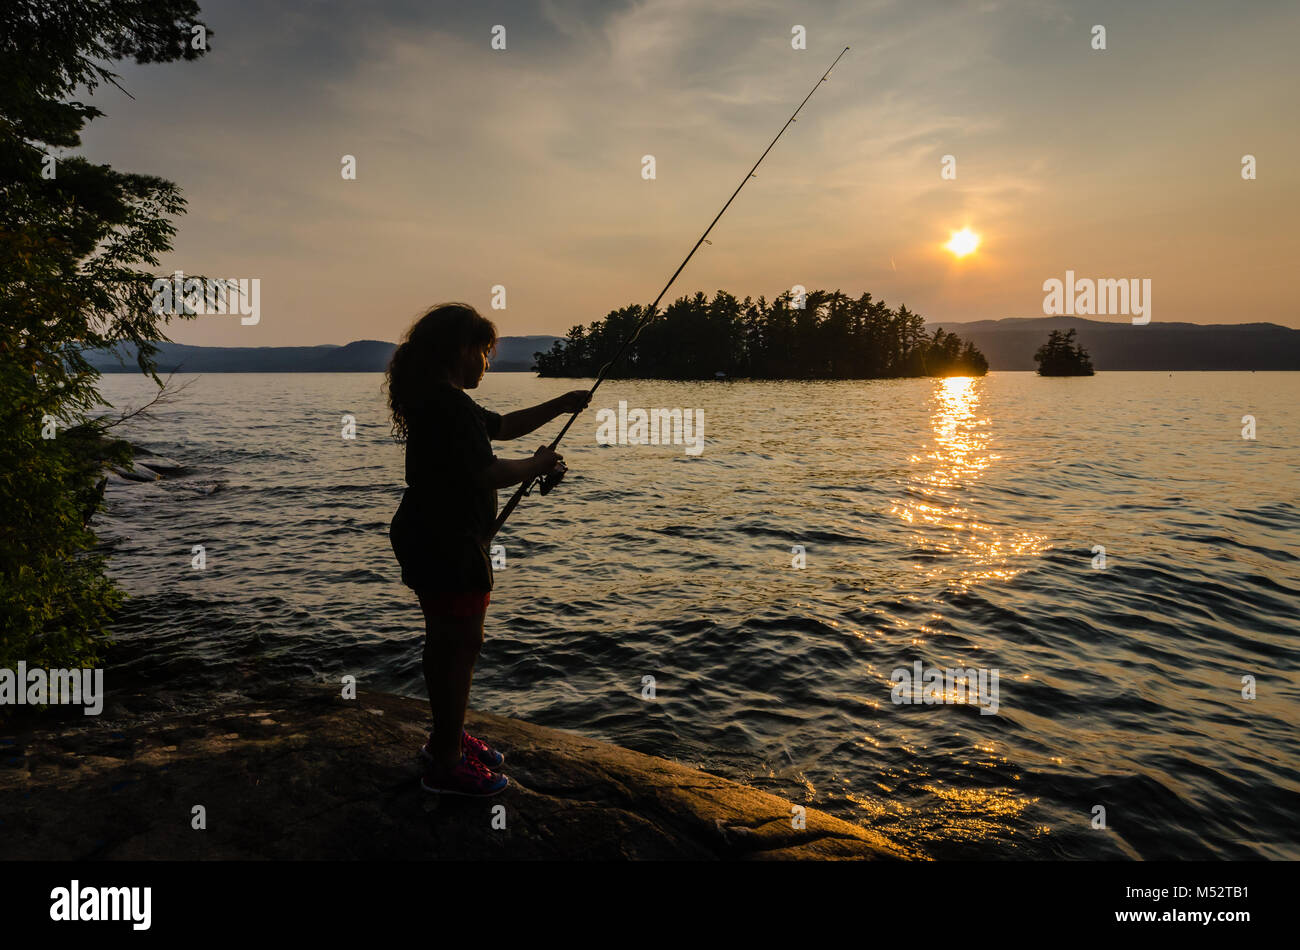 Young Hispanic girl fishes on a rock at Lake George in New York near the Adirondack Mountains as the setting sun casts a golden glow over her face. Stock Photo